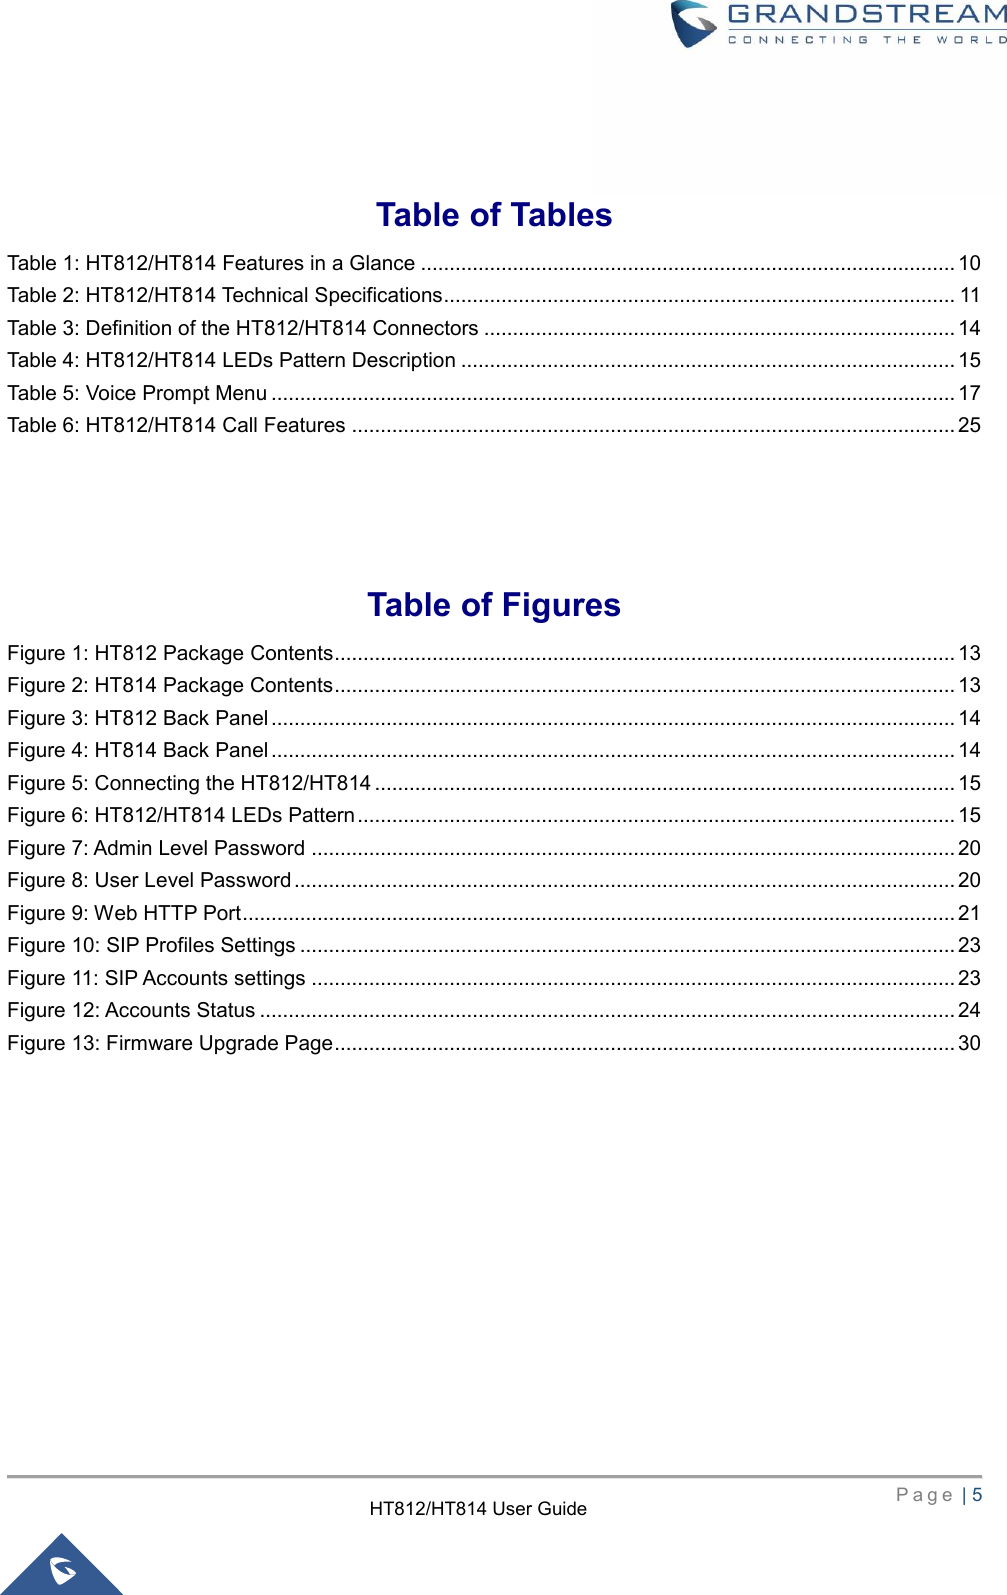     P a g e  | 5        HT812/HT814 User Guide   Table of Tables Table 1: HT812/HT814 Features in a Glance ............................................................................................. 10 Table 2: HT812/HT814 Technical Specifications ......................................................................................... 11 Table 3: Definition of the HT812/HT814 Connectors .................................................................................. 14 Table 4: HT812/HT814 LEDs Pattern Description ...................................................................................... 15 Table 5: Voice Prompt Menu ....................................................................................................................... 17 Table 6: HT812/HT814 Call Features ......................................................................................................... 25   Table of Figures Figure 1: HT812 Package Contents ............................................................................................................ 13 Figure 2: HT814 Package Contents ............................................................................................................ 13 Figure 3: HT812 Back Panel ....................................................................................................................... 14 Figure 4: HT814 Back Panel ....................................................................................................................... 14 Figure 5: Connecting the HT812/HT814 ..................................................................................................... 15 Figure 6: HT812/HT814 LEDs Pattern ........................................................................................................ 15 Figure 7: Admin Level Password ................................................................................................................ 20 Figure 8: User Level Password ................................................................................................................... 20 Figure 9: Web HTTP Port ............................................................................................................................ 21 Figure 10: SIP Profiles Settings .................................................................................................................. 23 Figure 11: SIP Accounts settings ................................................................................................................ 23 Figure 12: Accounts Status ......................................................................................................................... 24 Figure 13: Firmware Upgrade Page ............................................................................................................ 30  